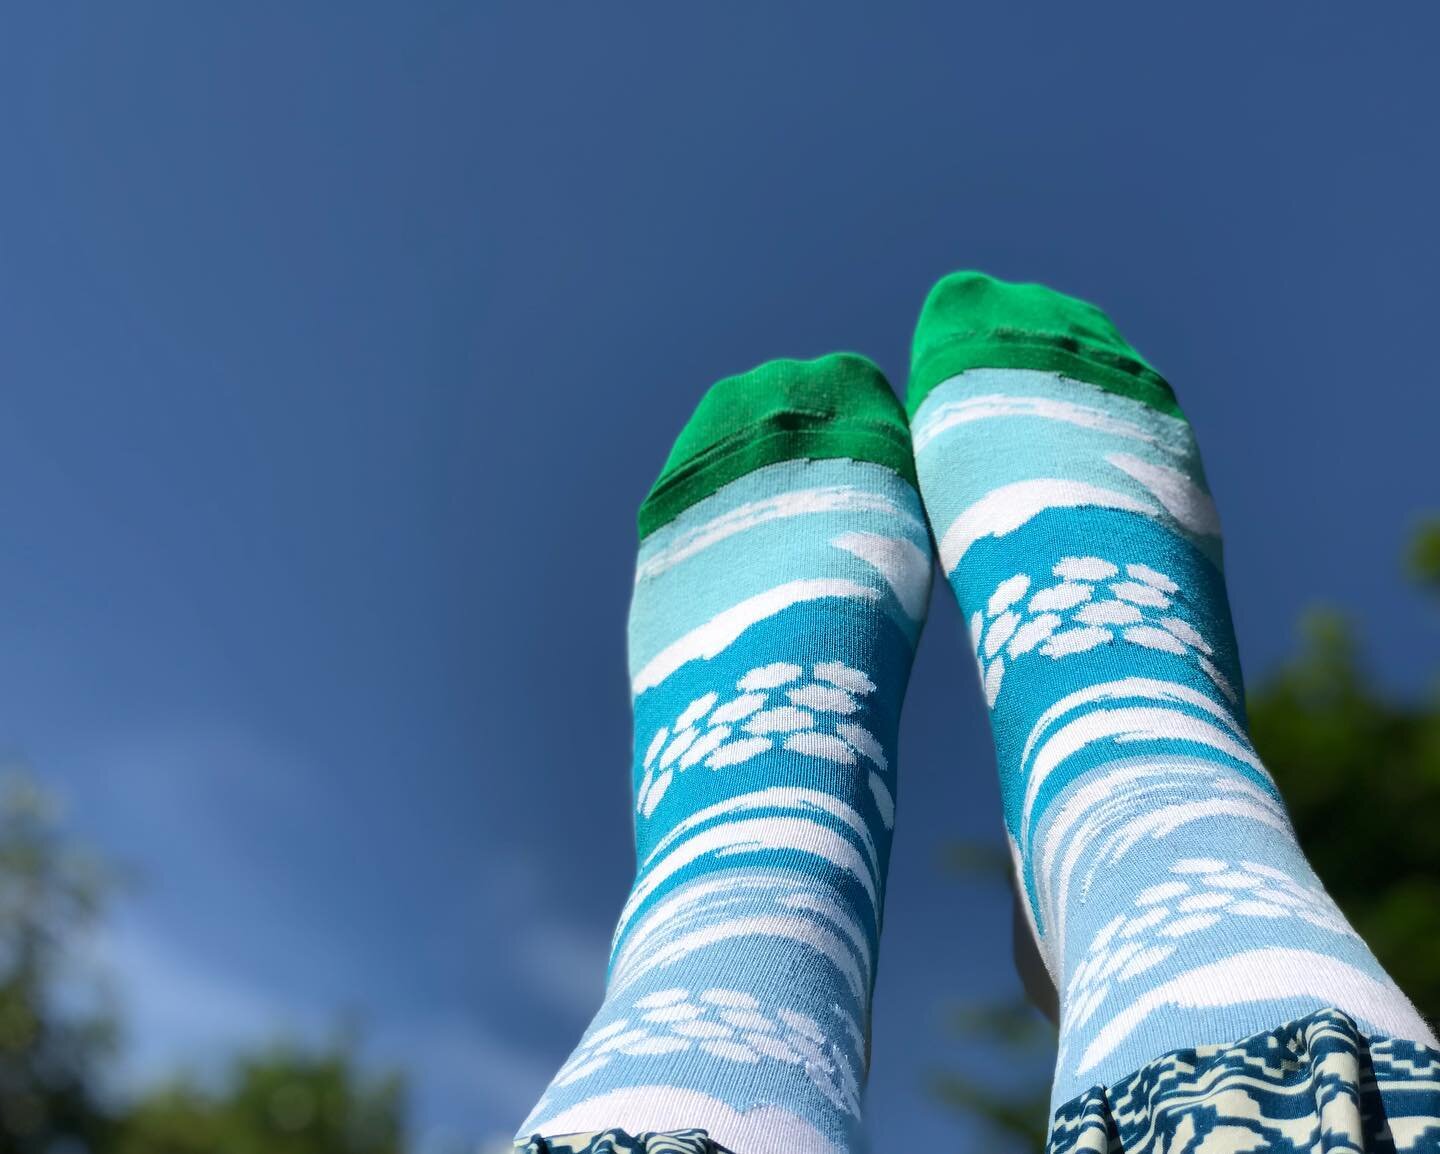 I&rsquo;m channeling my inner meteorologist this week with scientifically accurate cloud type socks - the atmospheric levels are 100% to scale, showing the correct types of clouds at each altitude! You KNOW how much fun I have designing socks like th